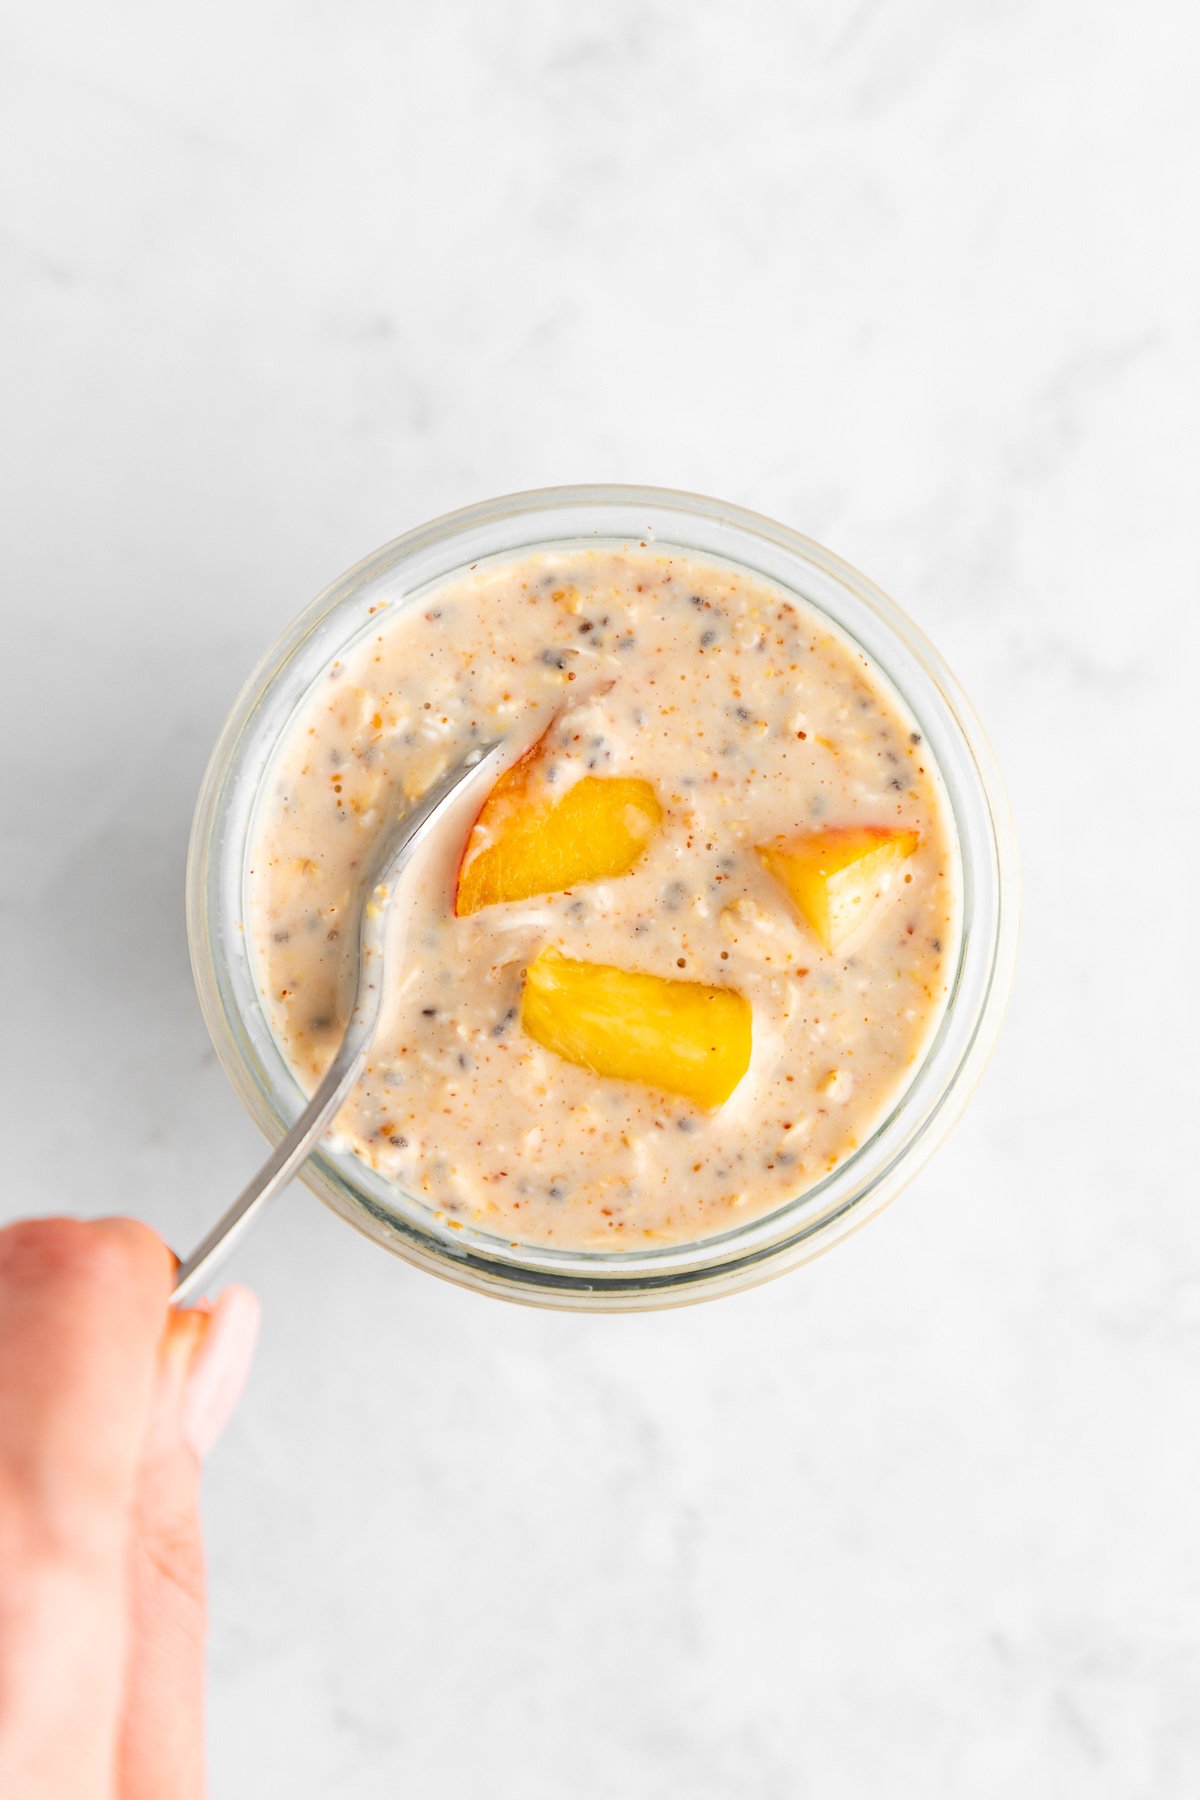 a hand holding a spoon mixing peaches and cream overnight oats in a jar